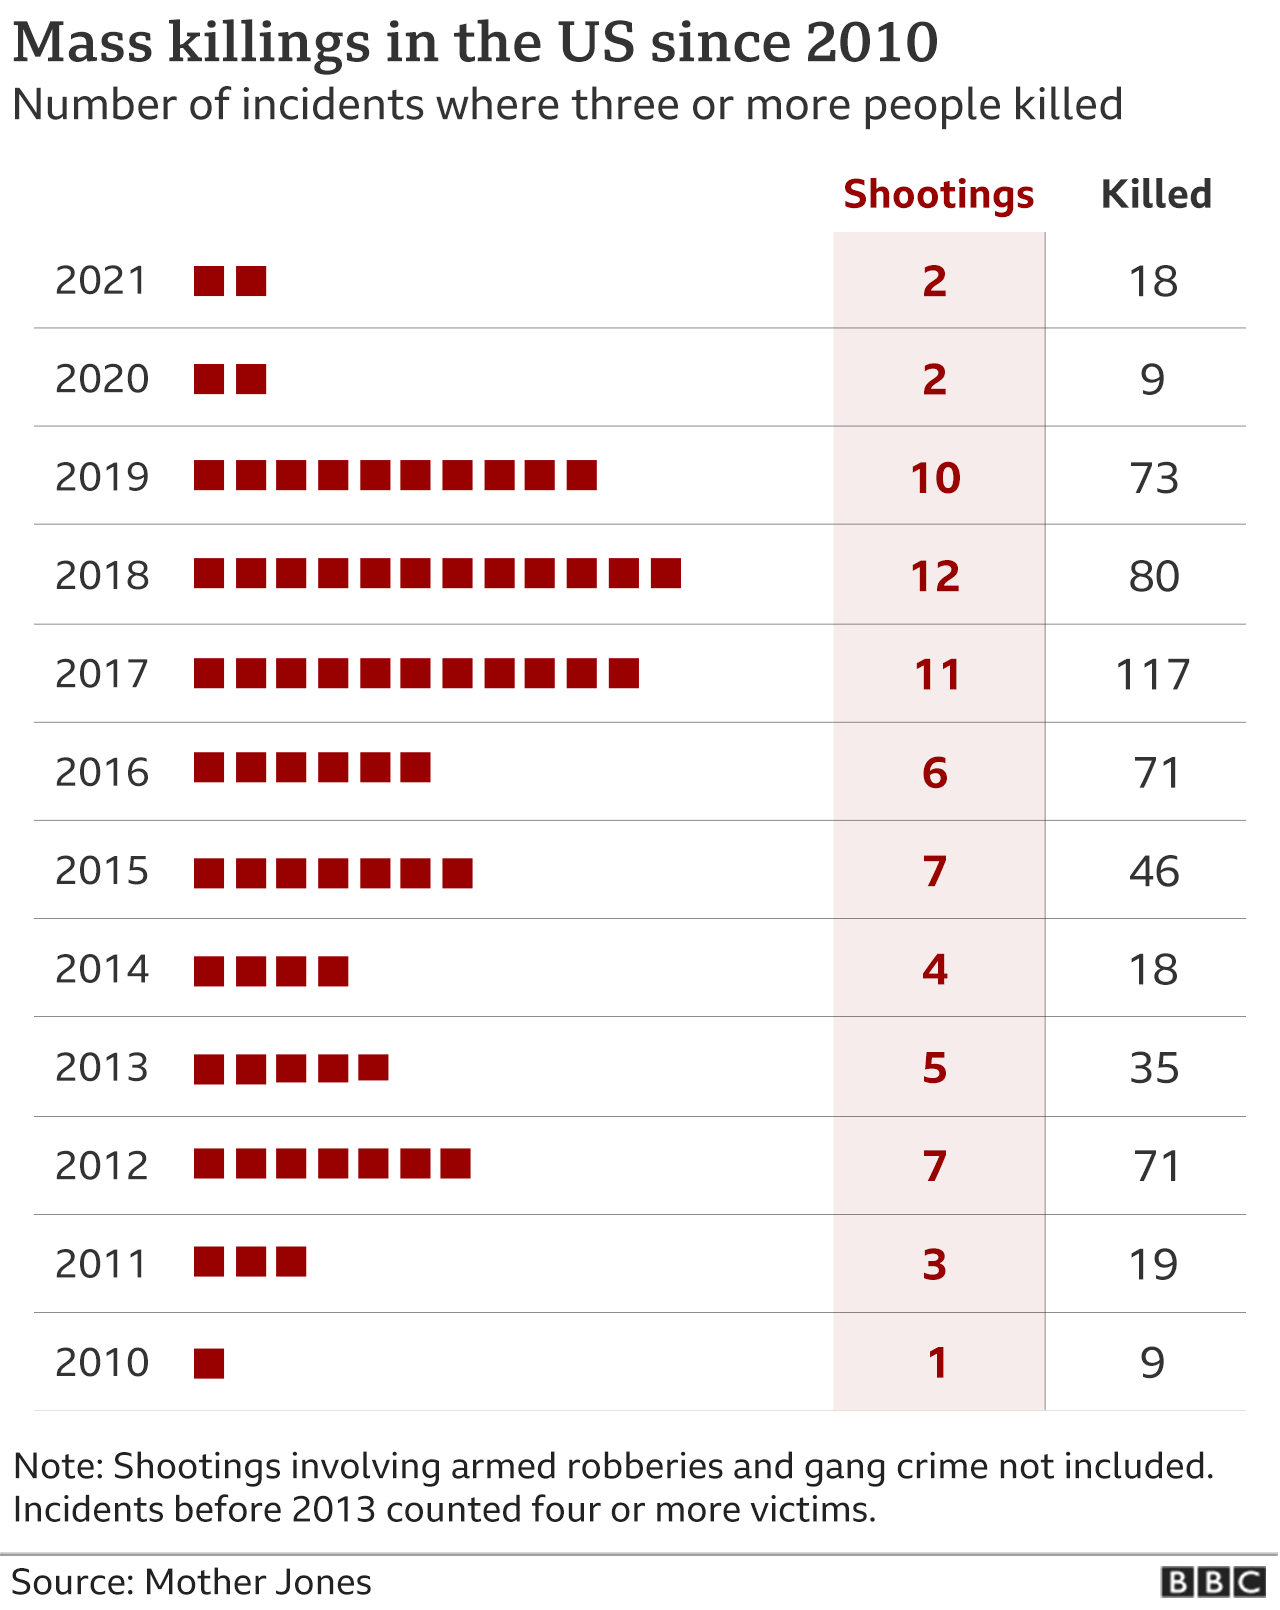 Mass shootings in the US since 2010